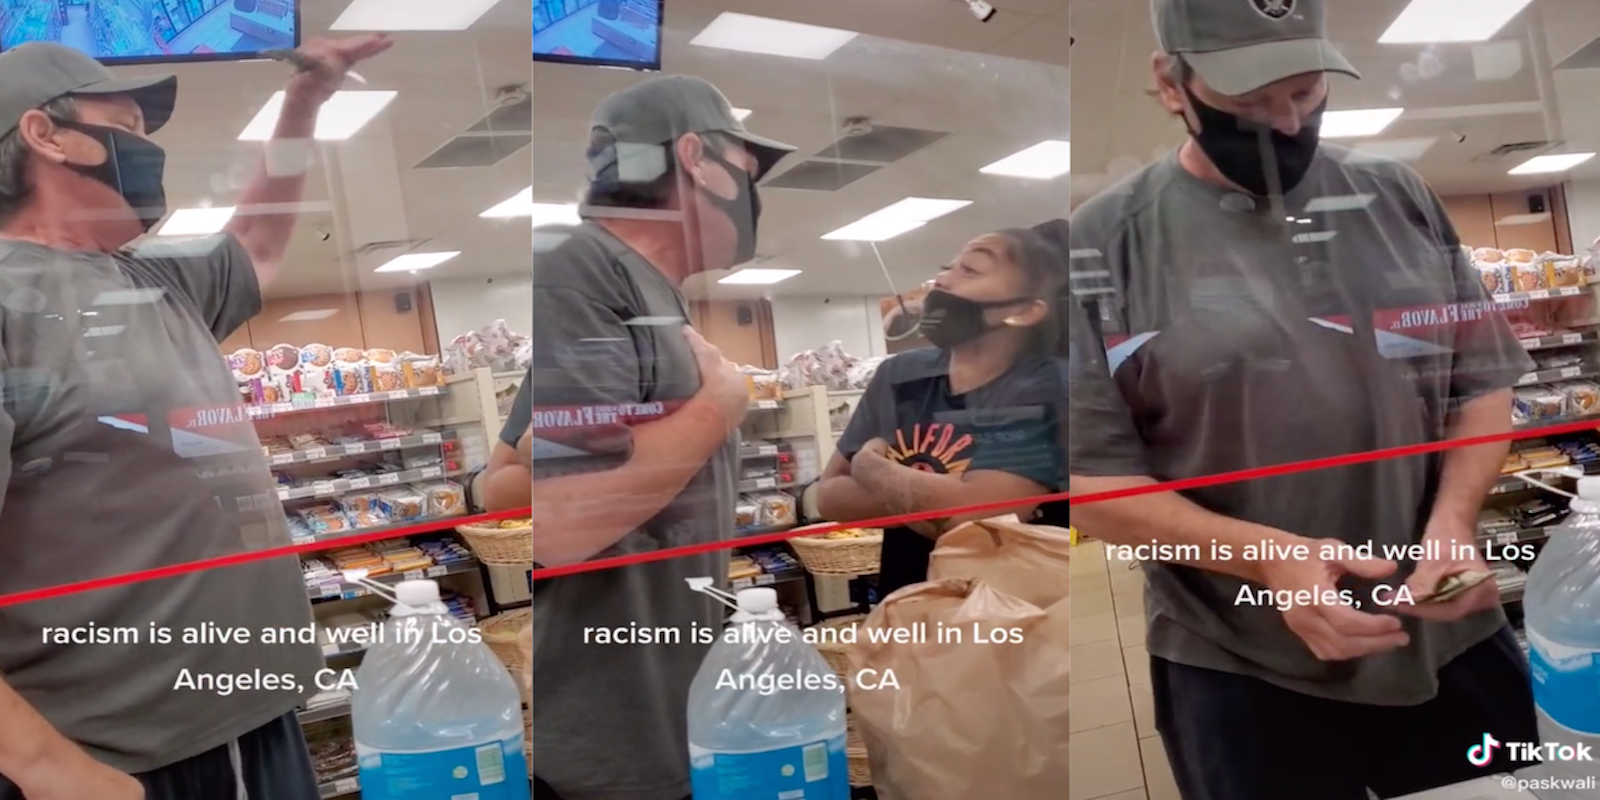 Three panel screenshot from TikTok showing an argument between a white man and Black woman. The man repeatedly calls the woman 'Shaniqua' after arguing about the Black woman being loud in the store.